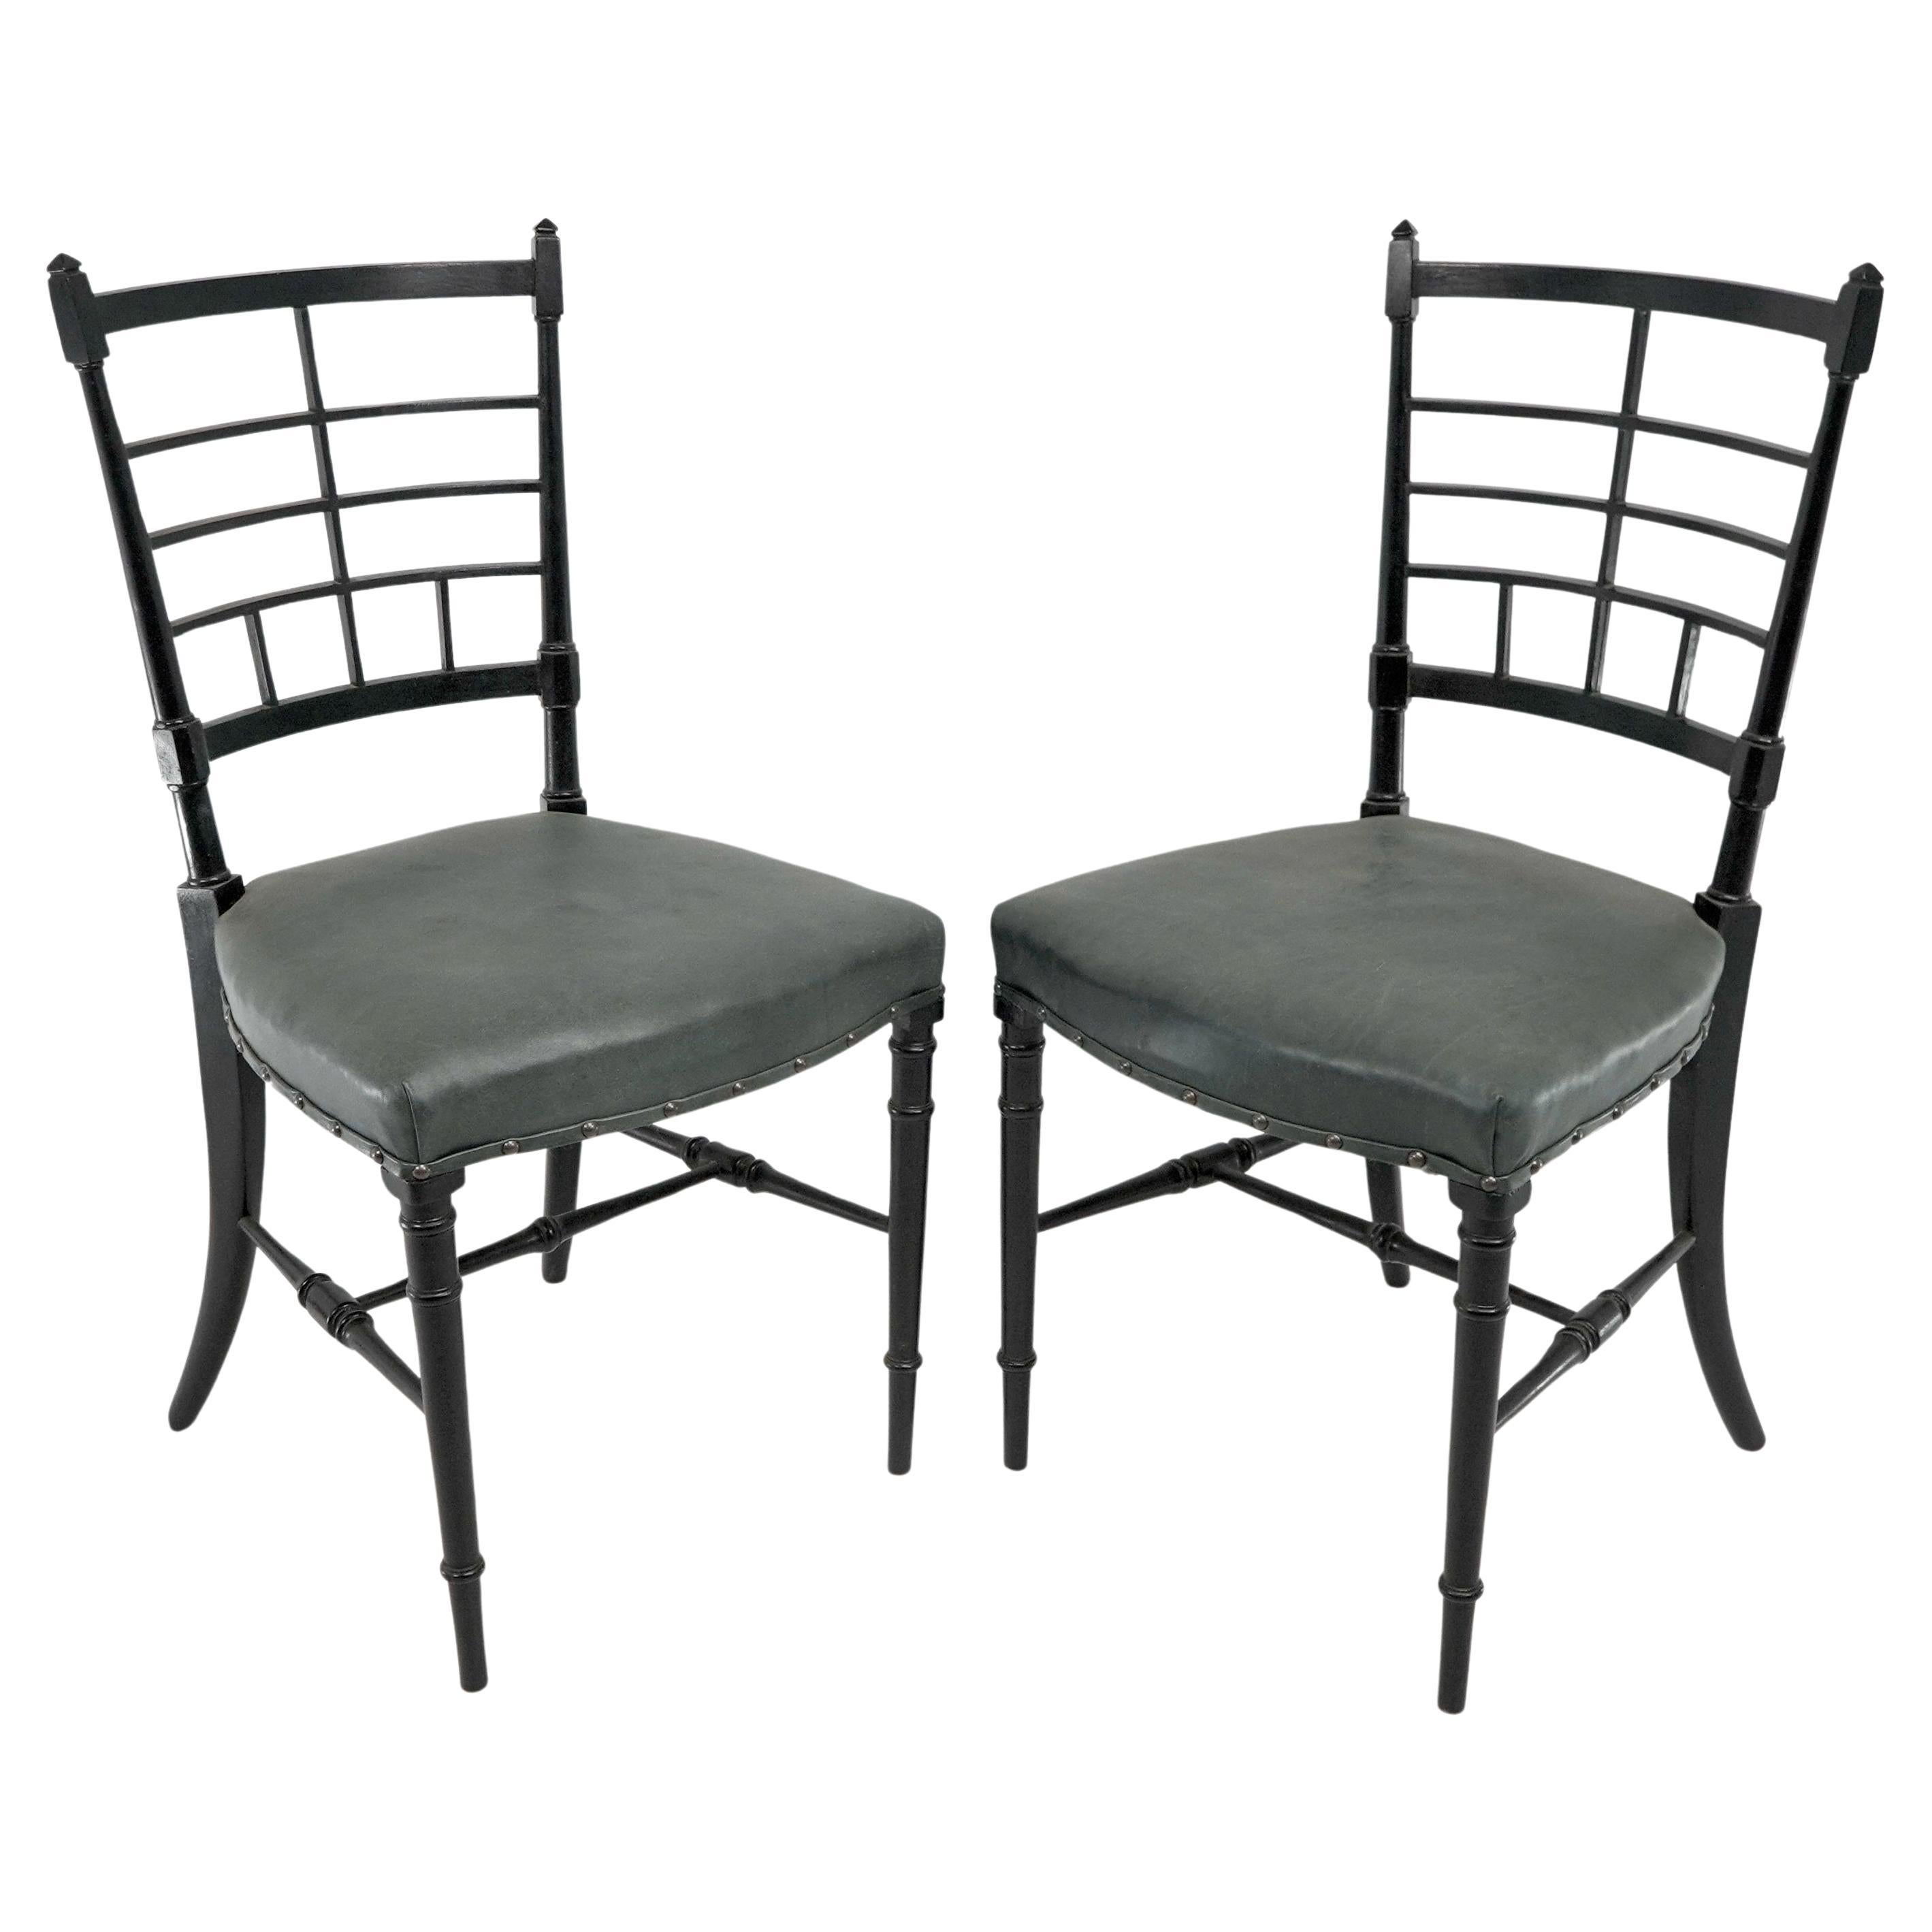 James Plucknett A pair of Anglo-Japanese ebonized side chairs